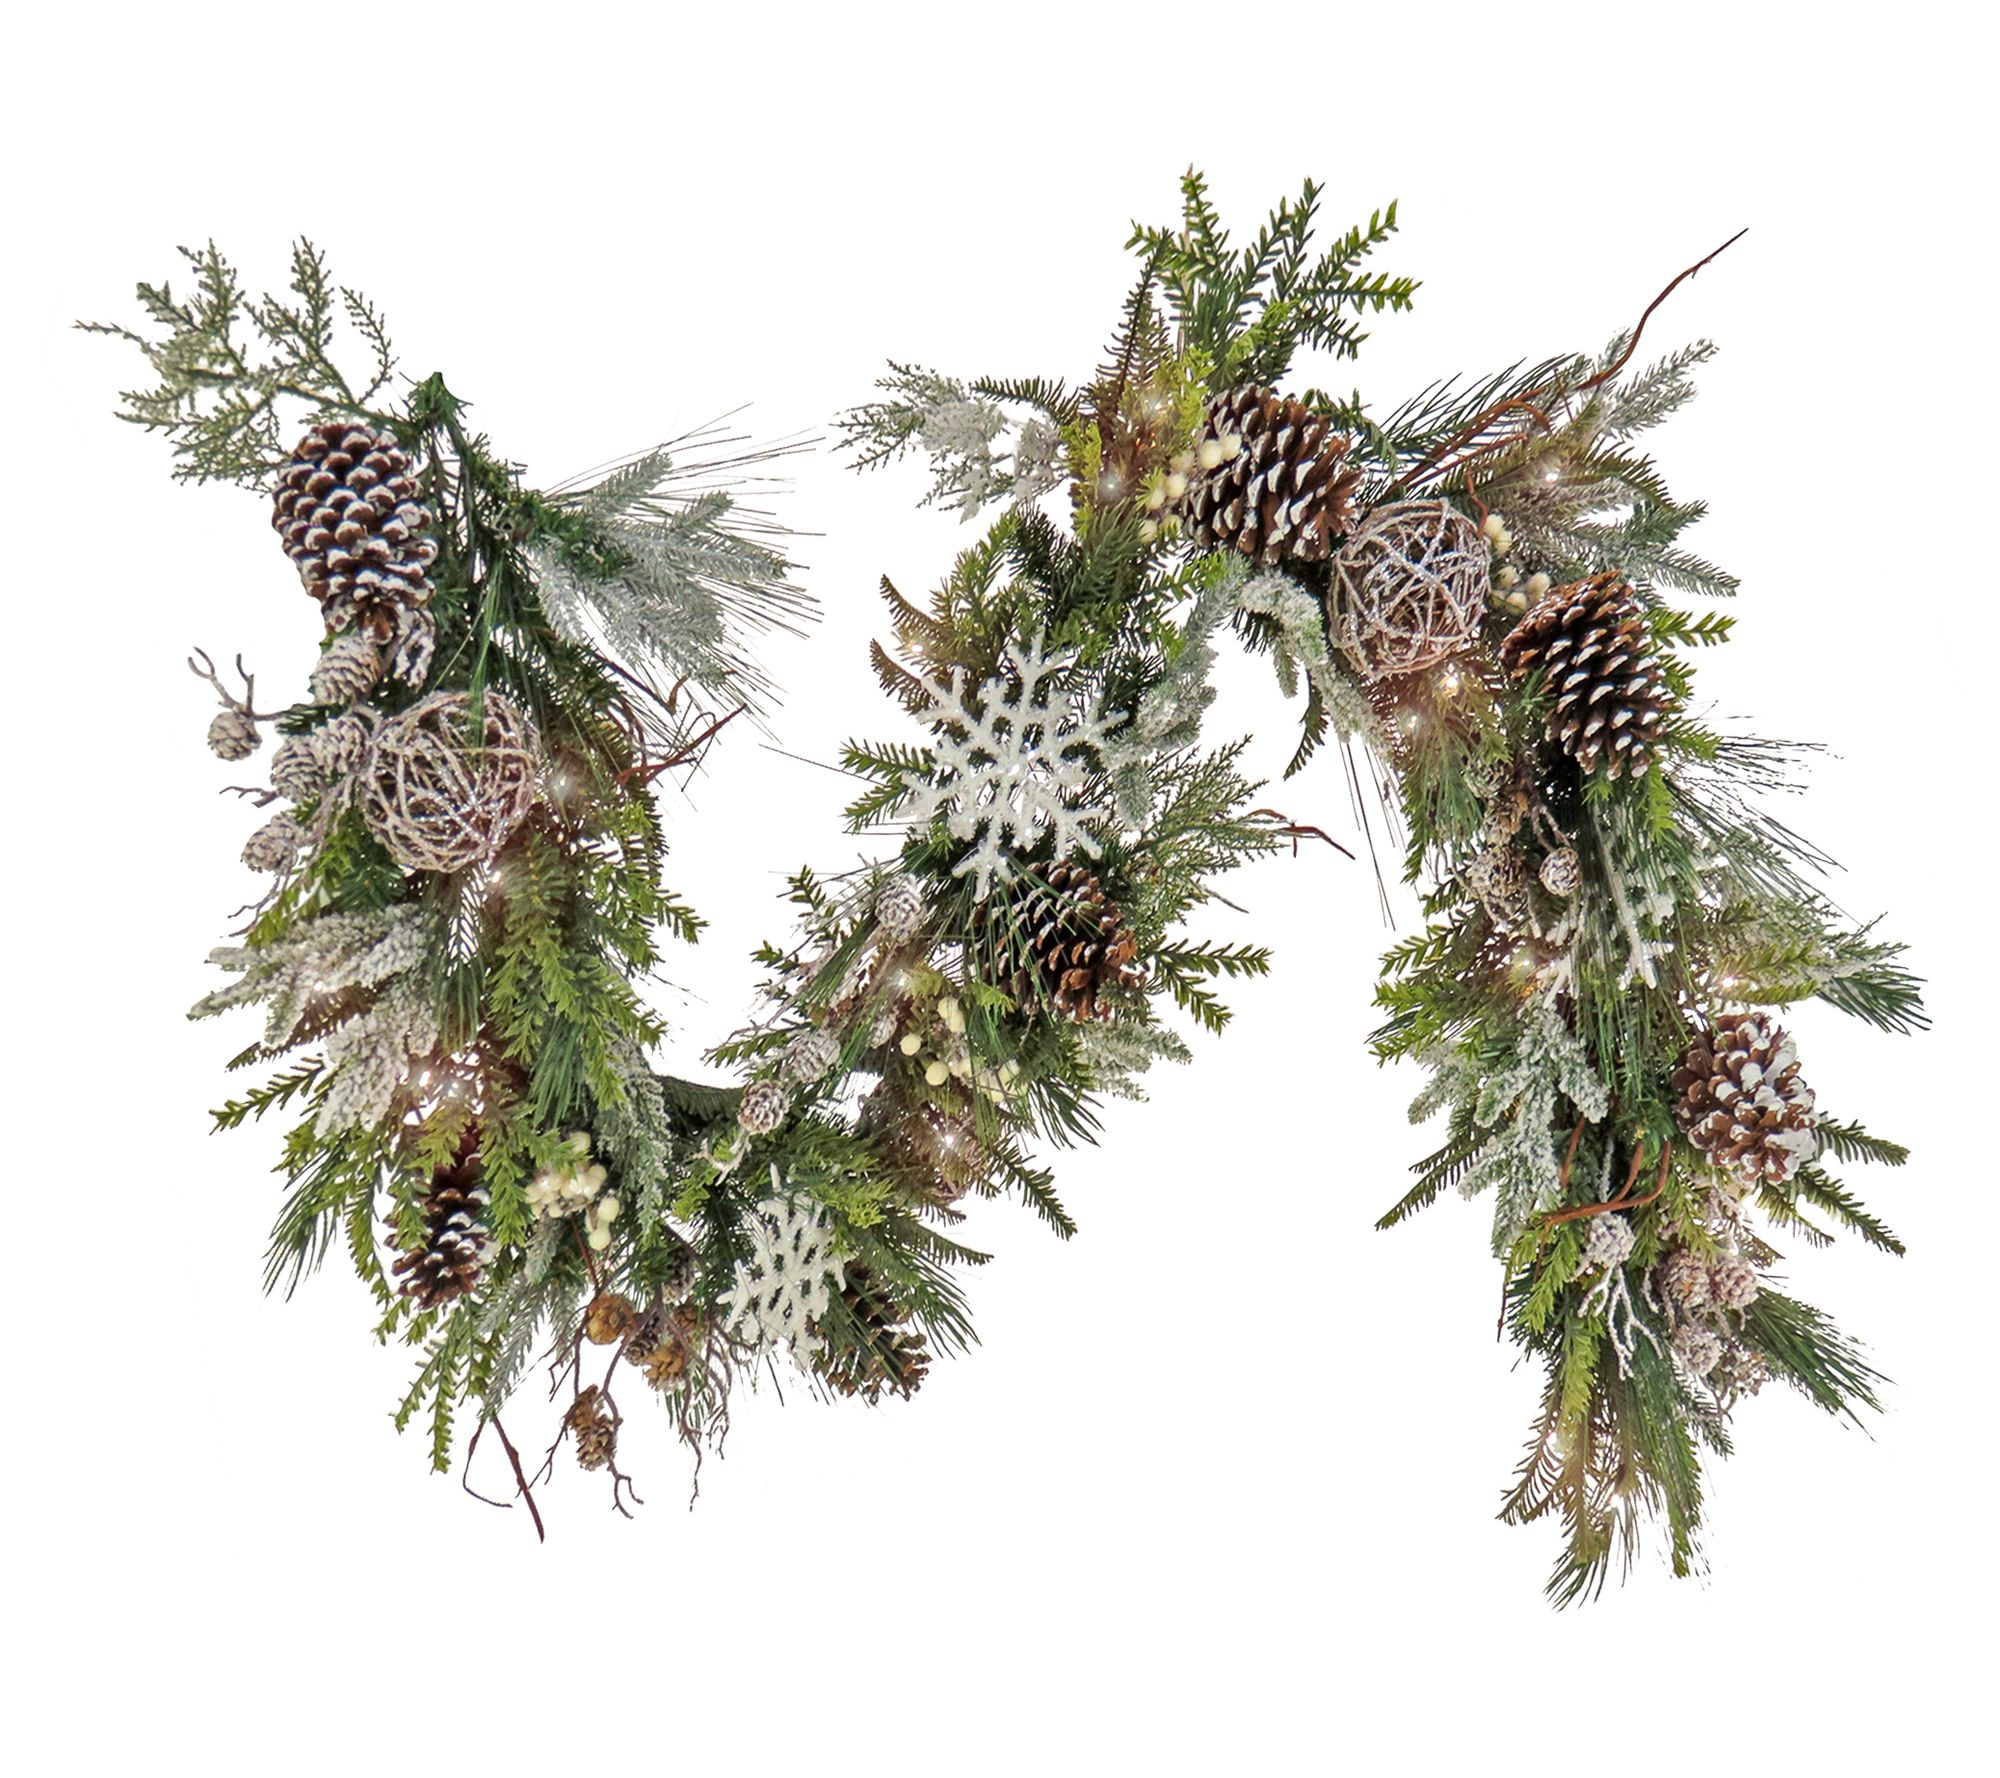 Twig pine cone Christmas garland learn how to make it for free!